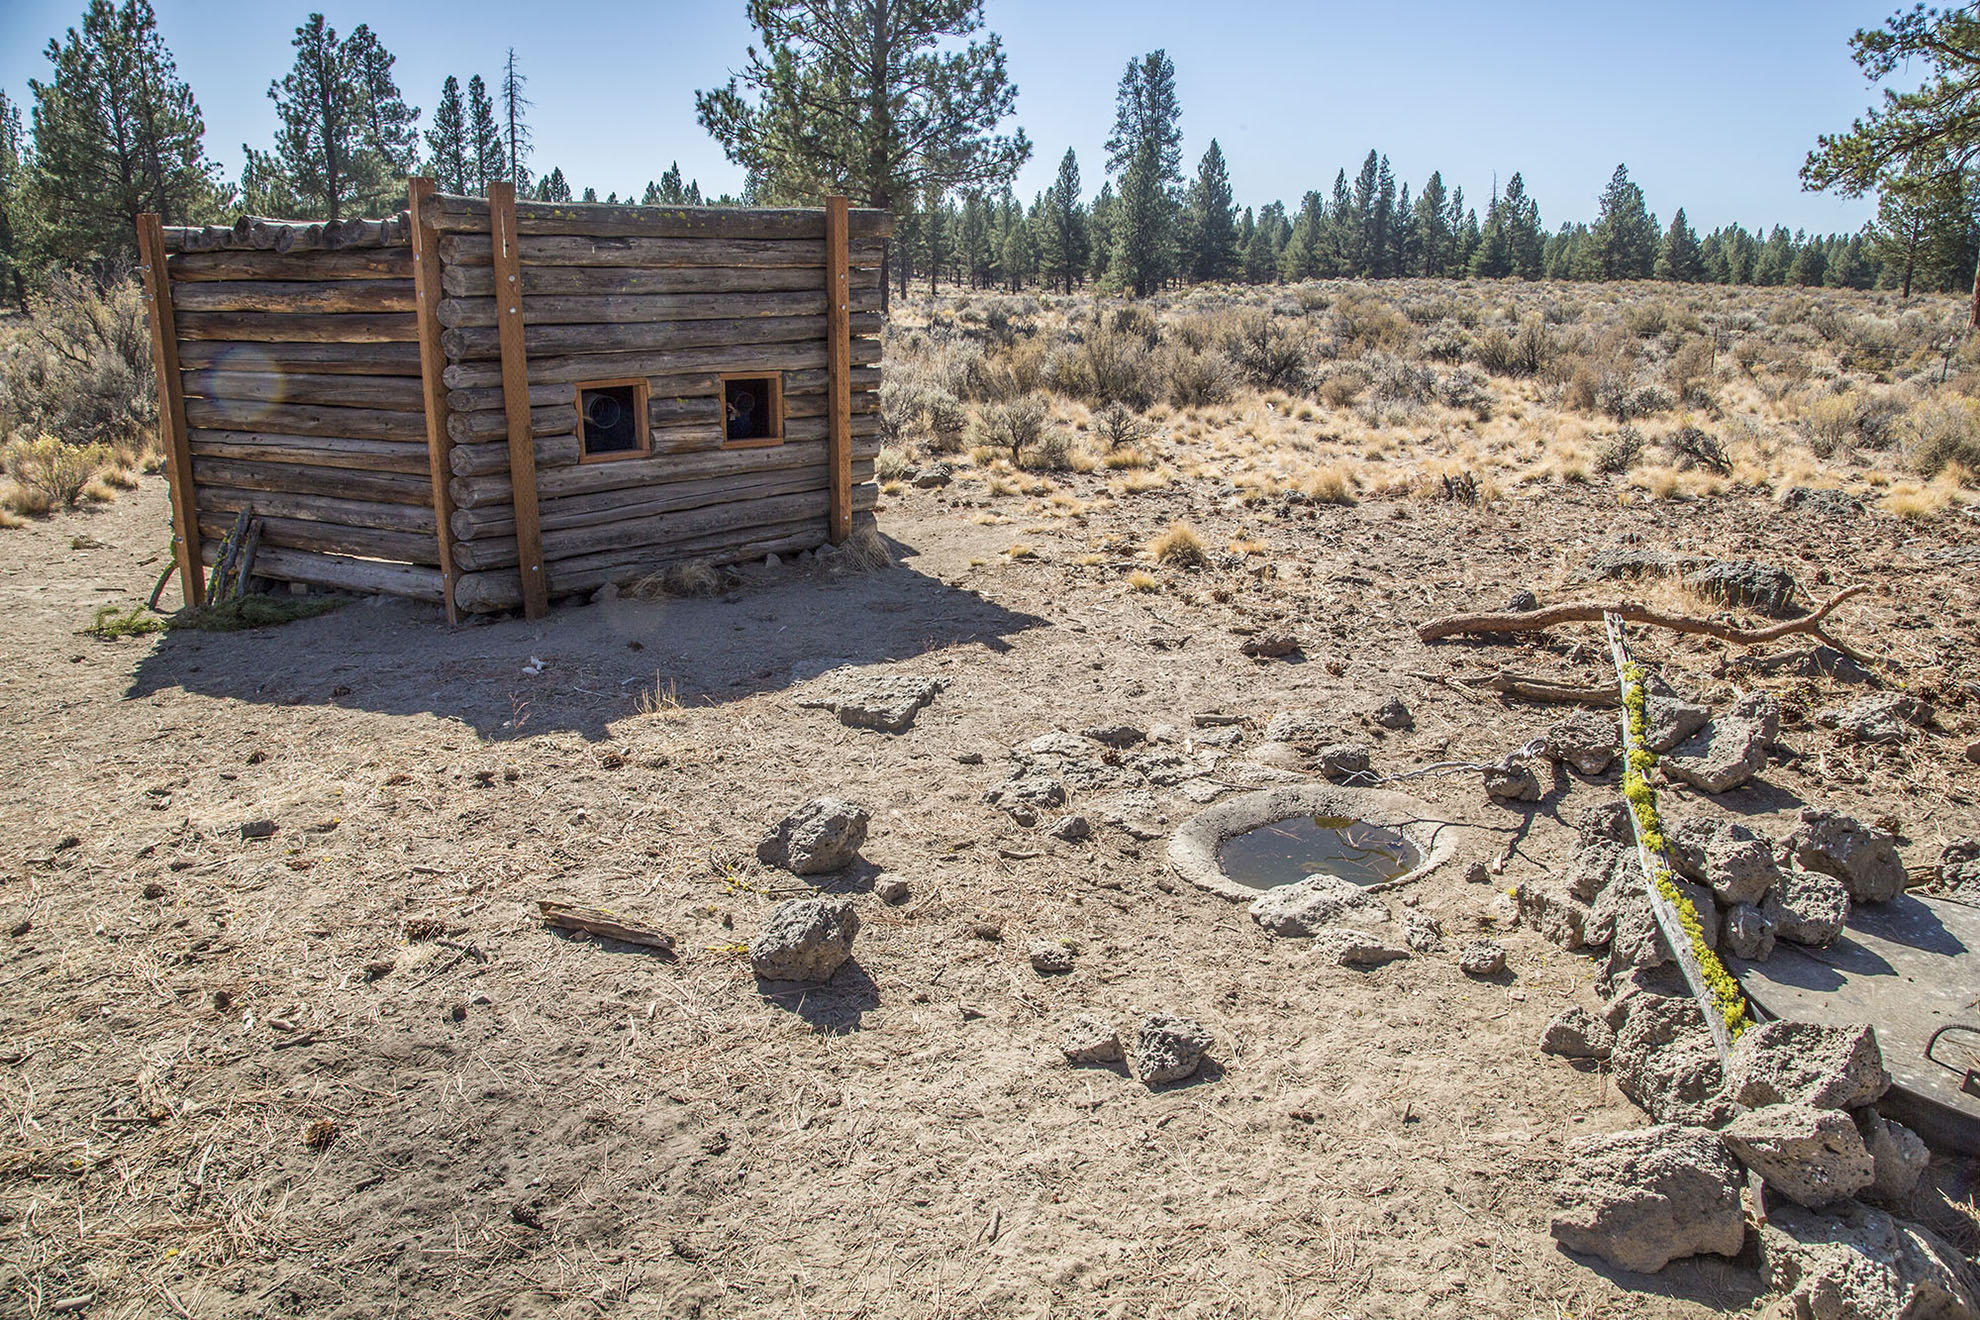 Image of a permanent blind on U.S. Forest Service property in dry eastern Oregon